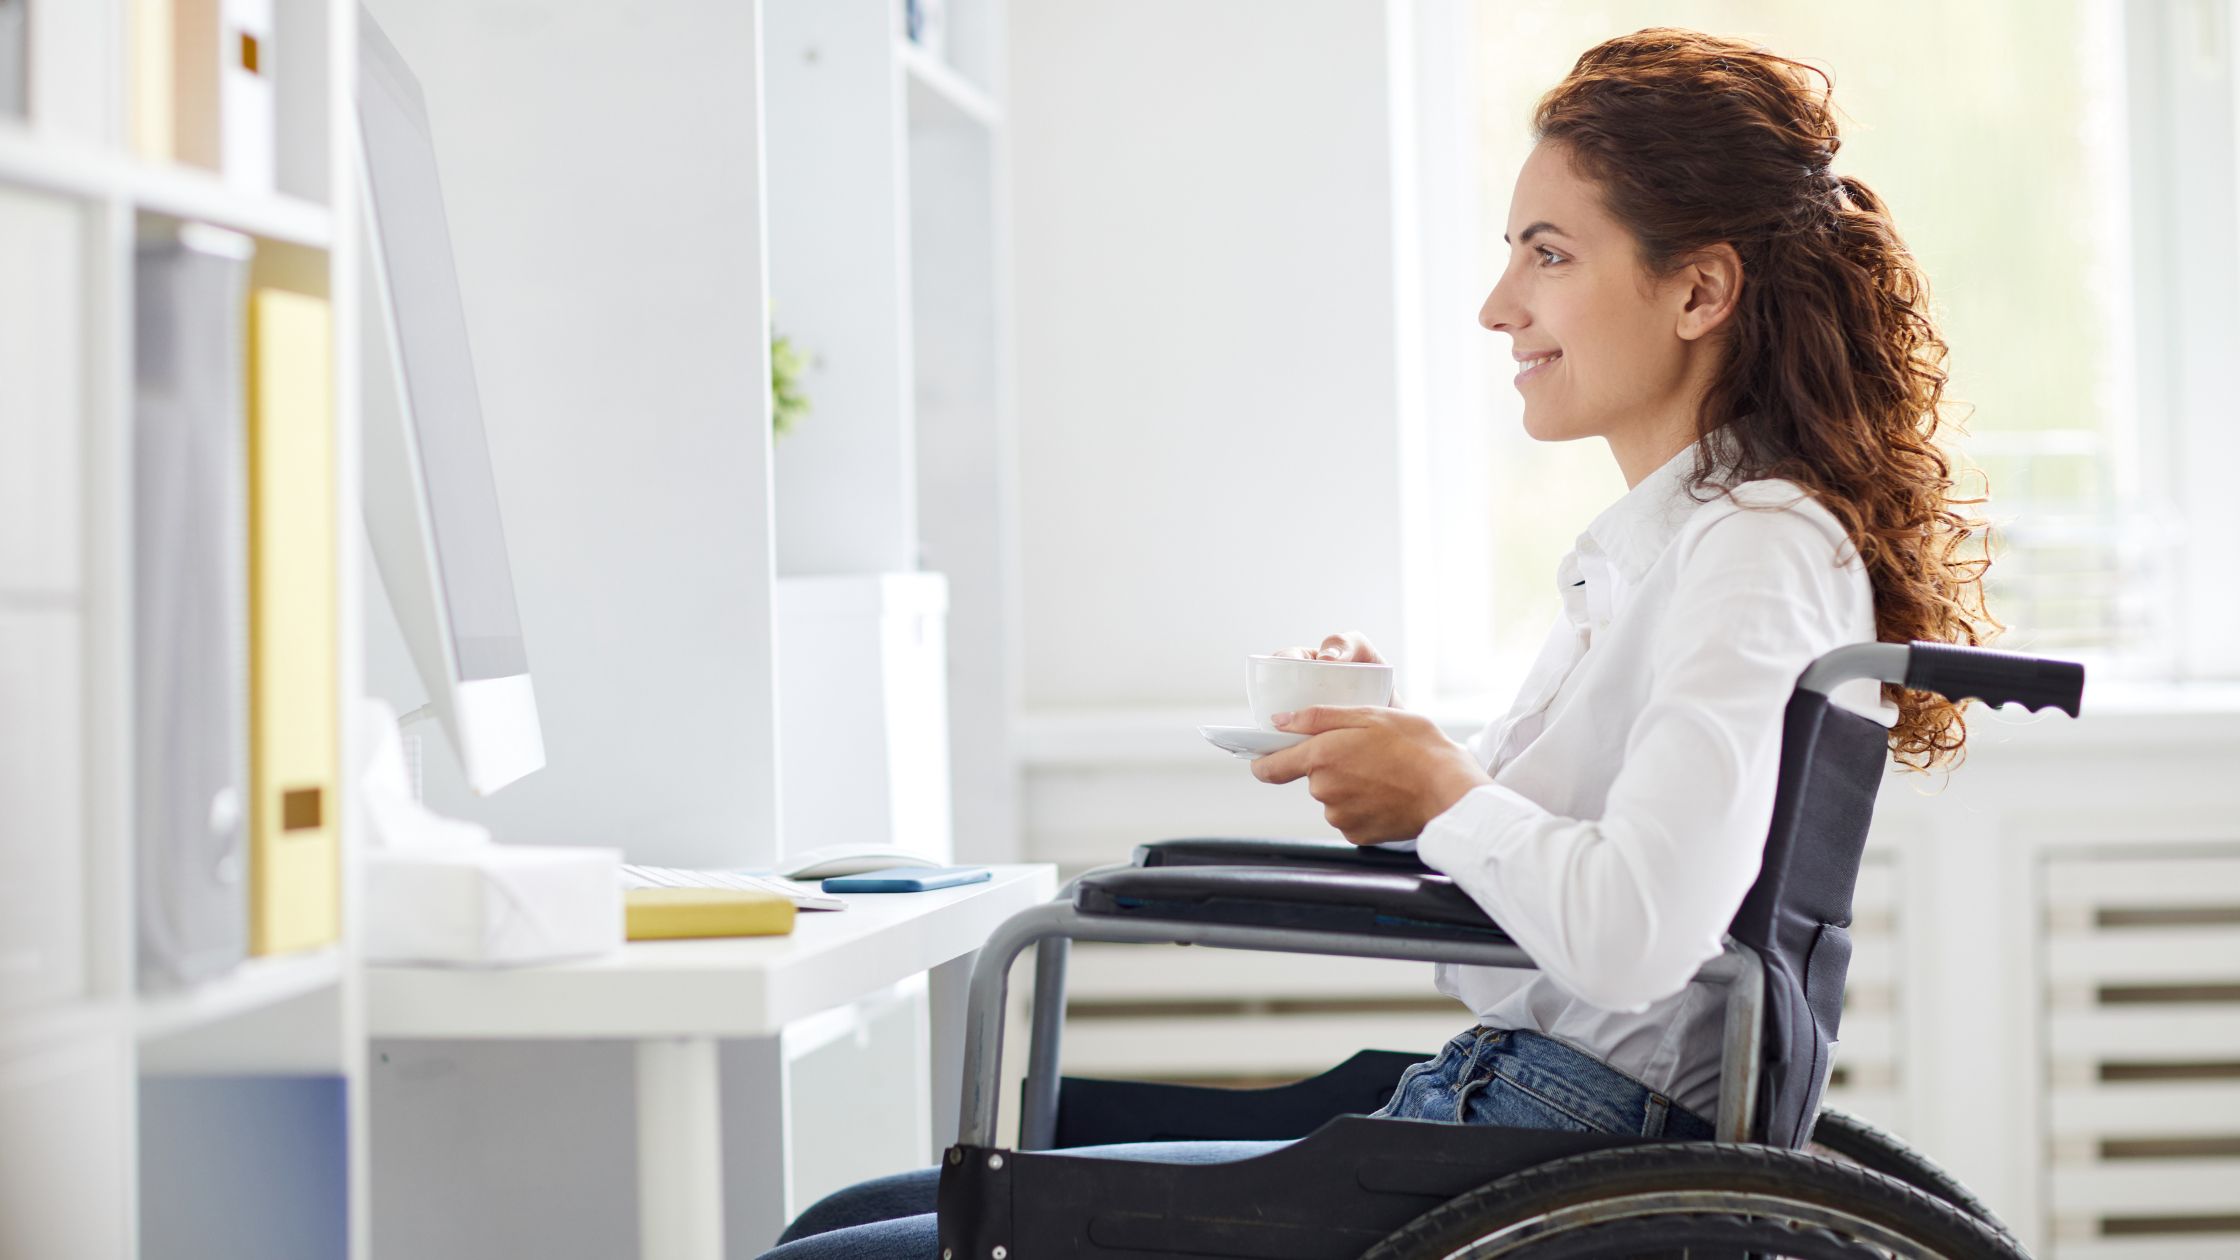 How To Help Manage The Safety Of Remote Employees With Disabilities